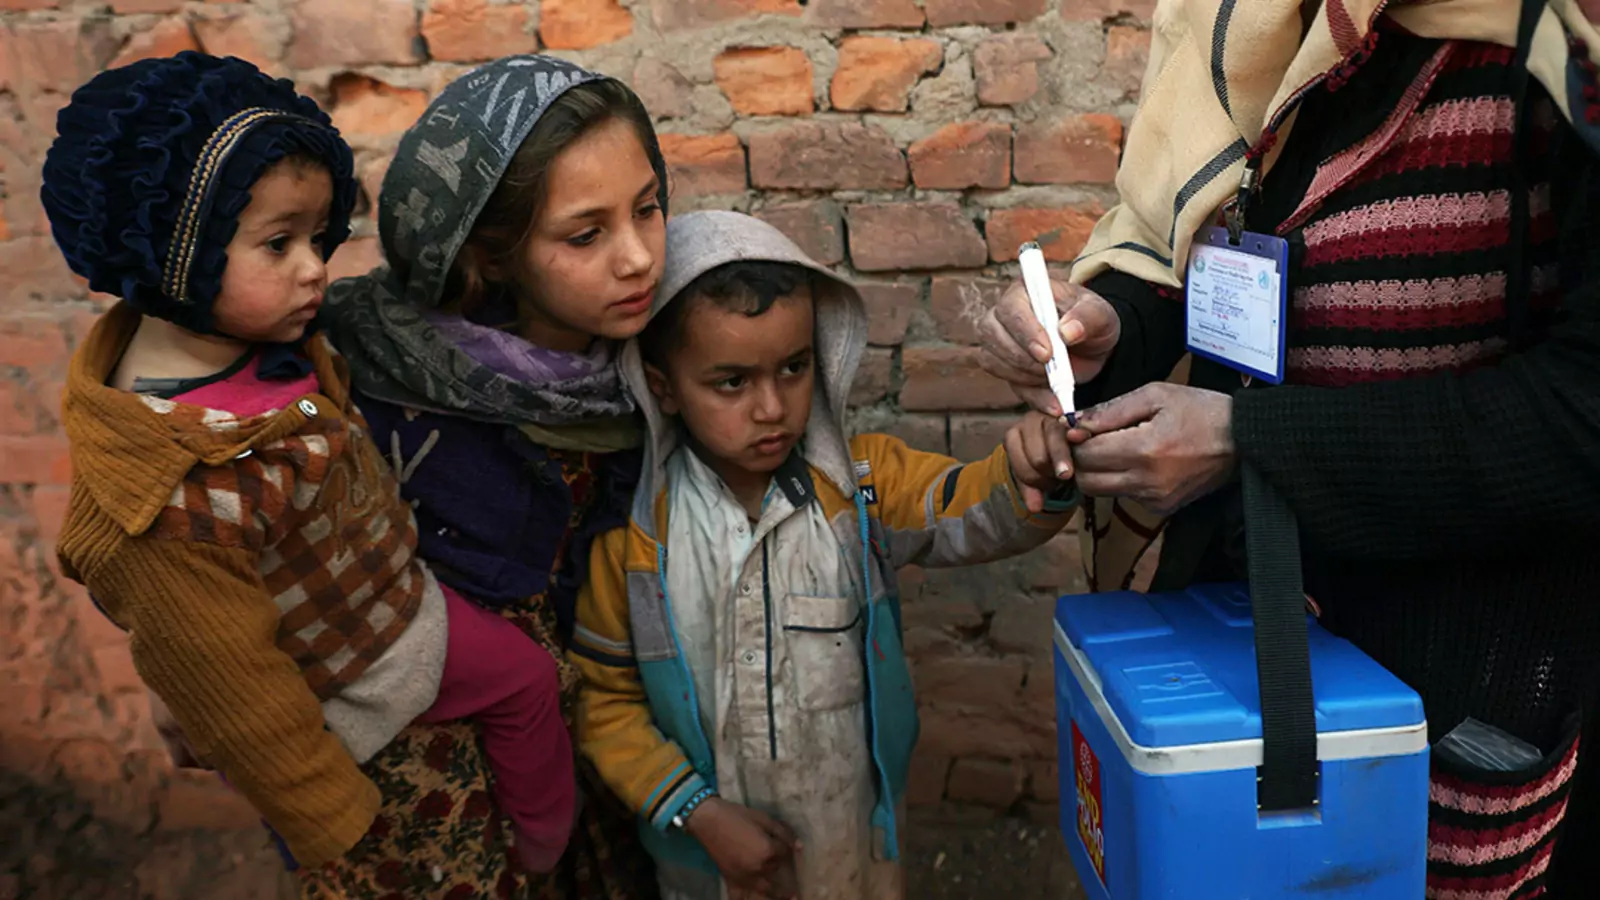 Why Hasn't the World Eradicated Polio? | Council on Foreign Relations